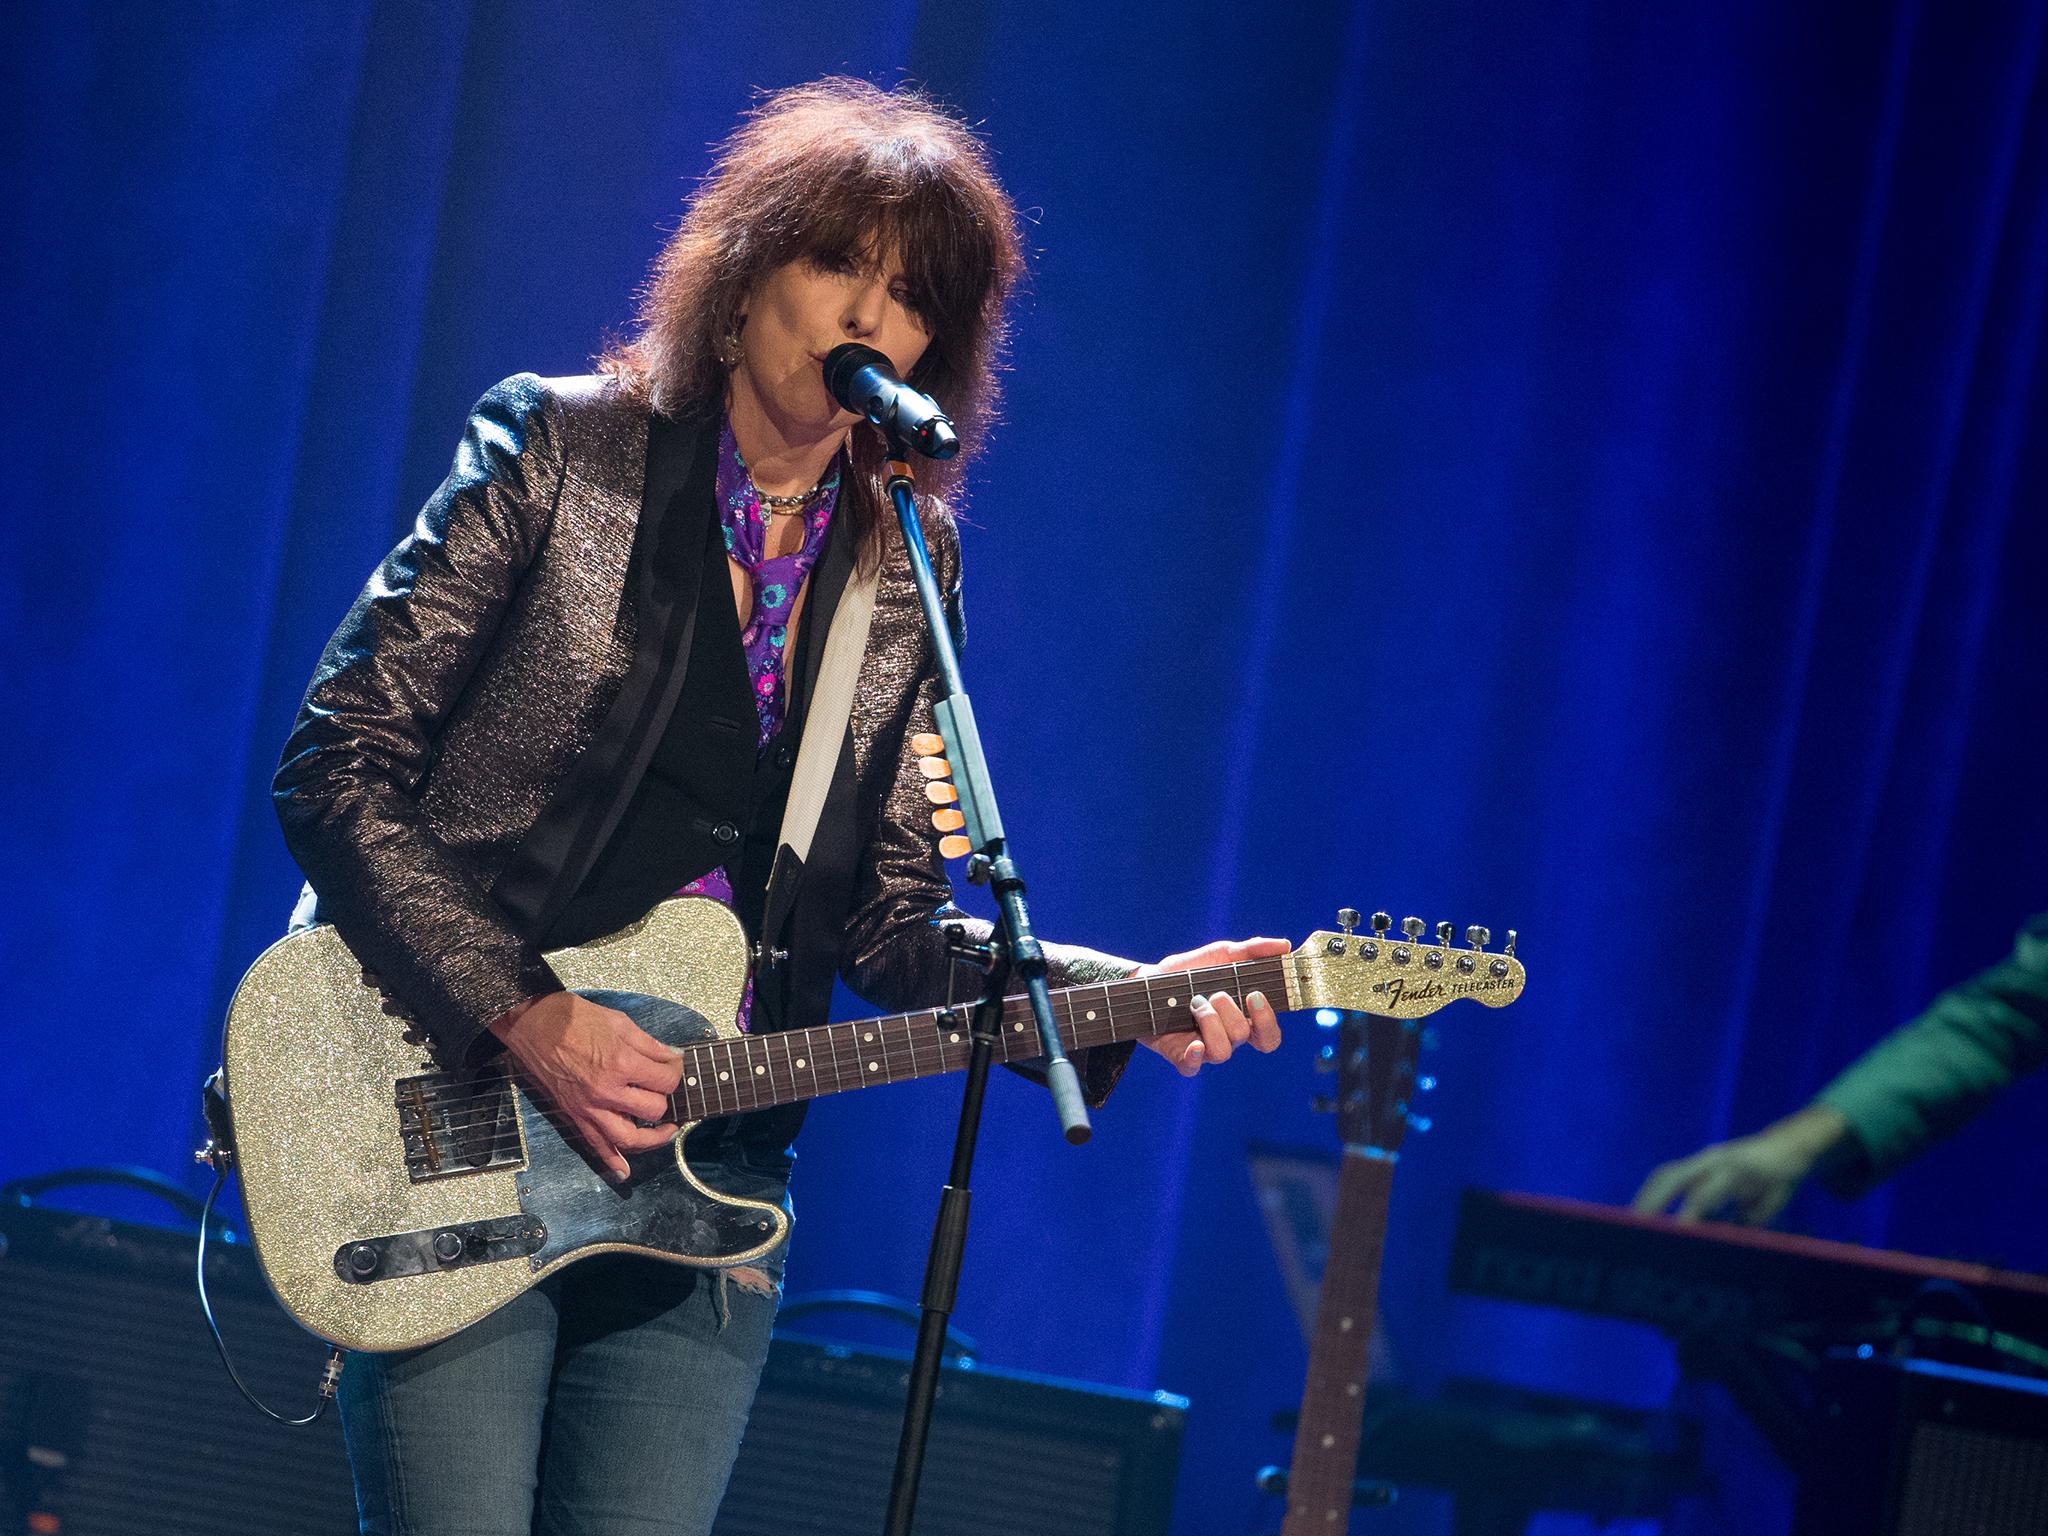 The singer Chrissie Hynde said she took responsibility for a sex attack upon her when she was in her twenties